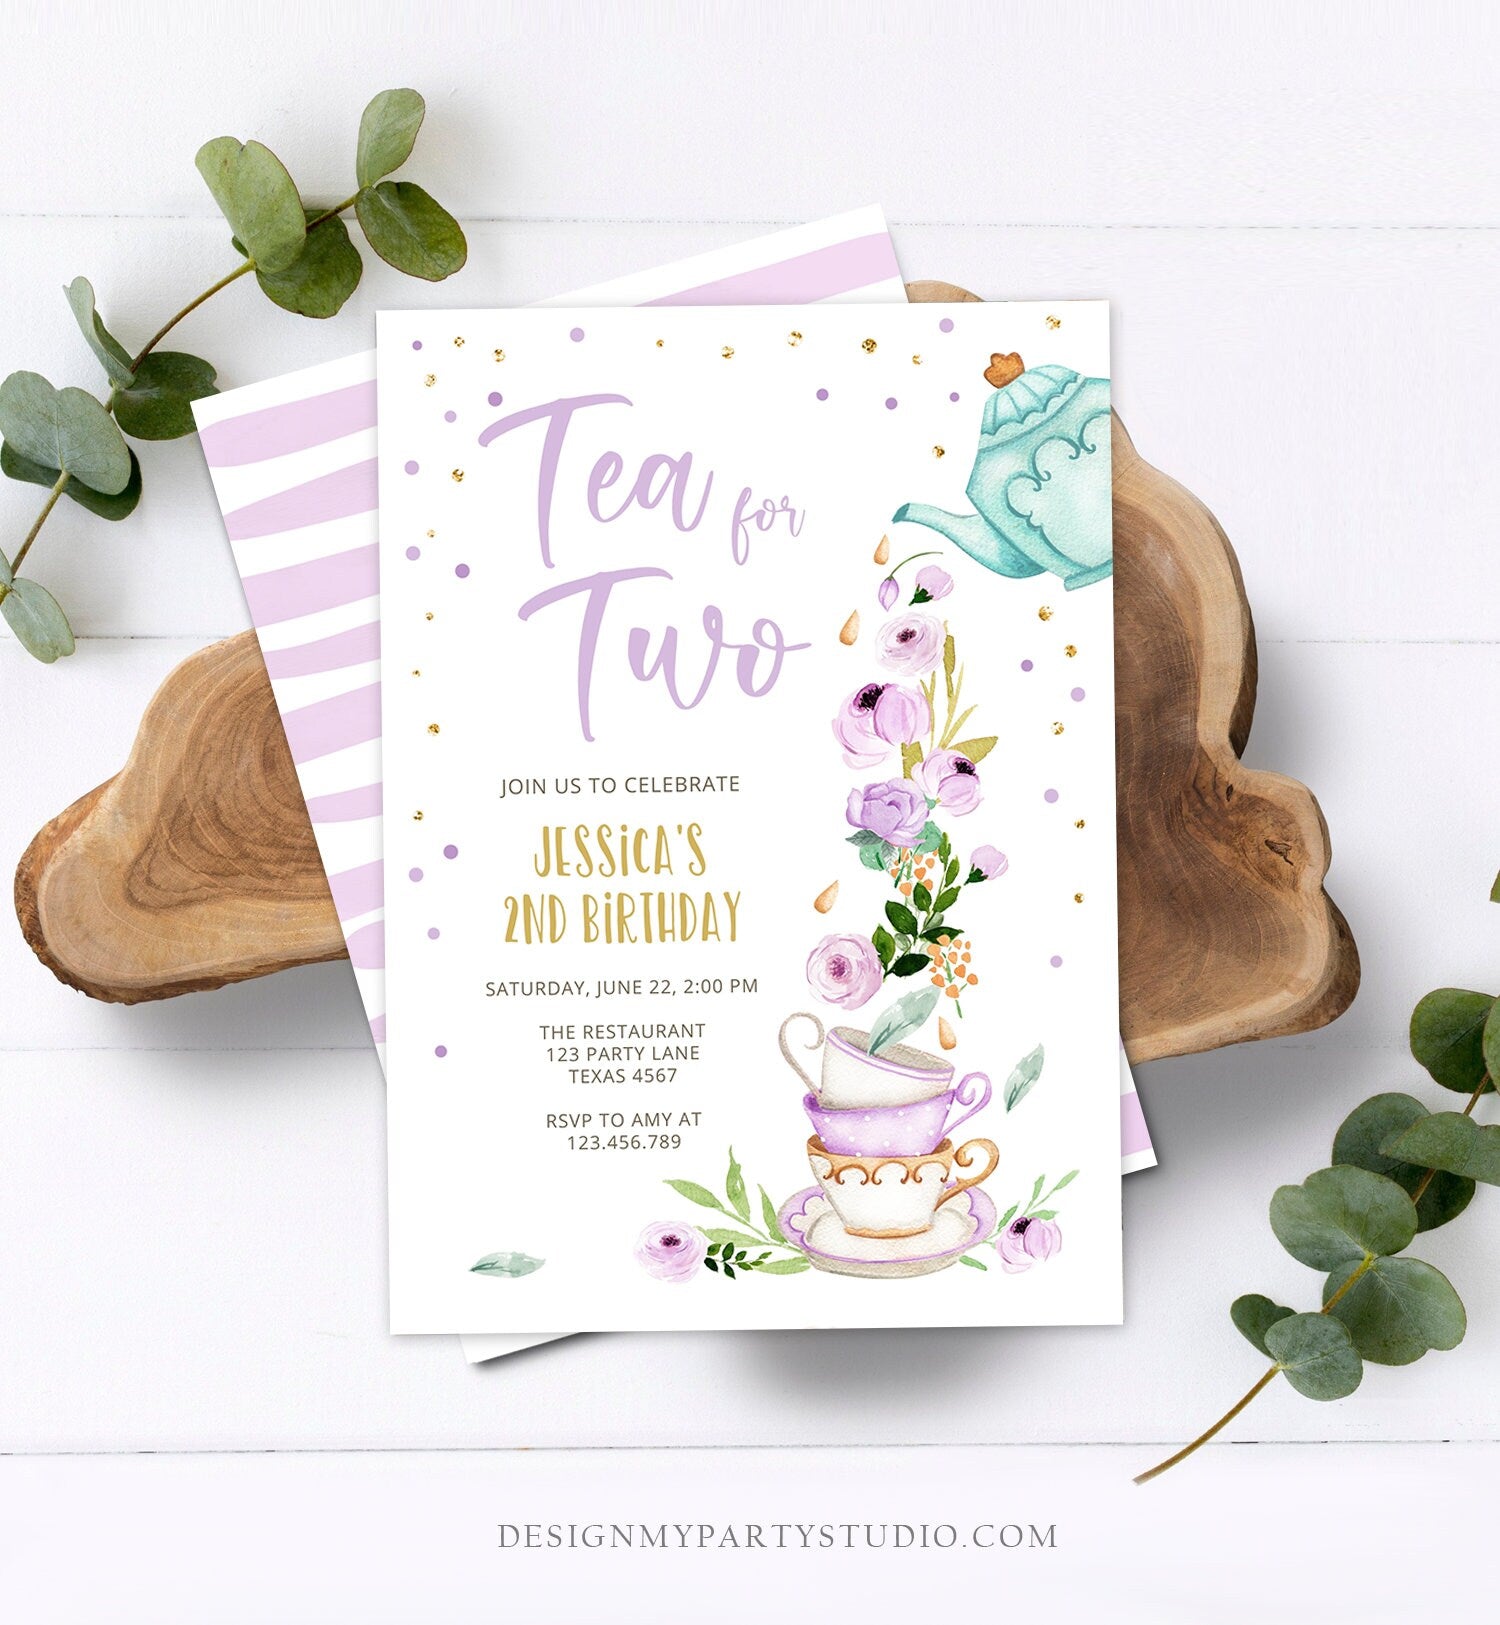 Editable Tea for Two Birthday Invitation Girl Tea Party Invite Pink Purple Floral Whimsical Download Printable Template Corjl Digital 0349